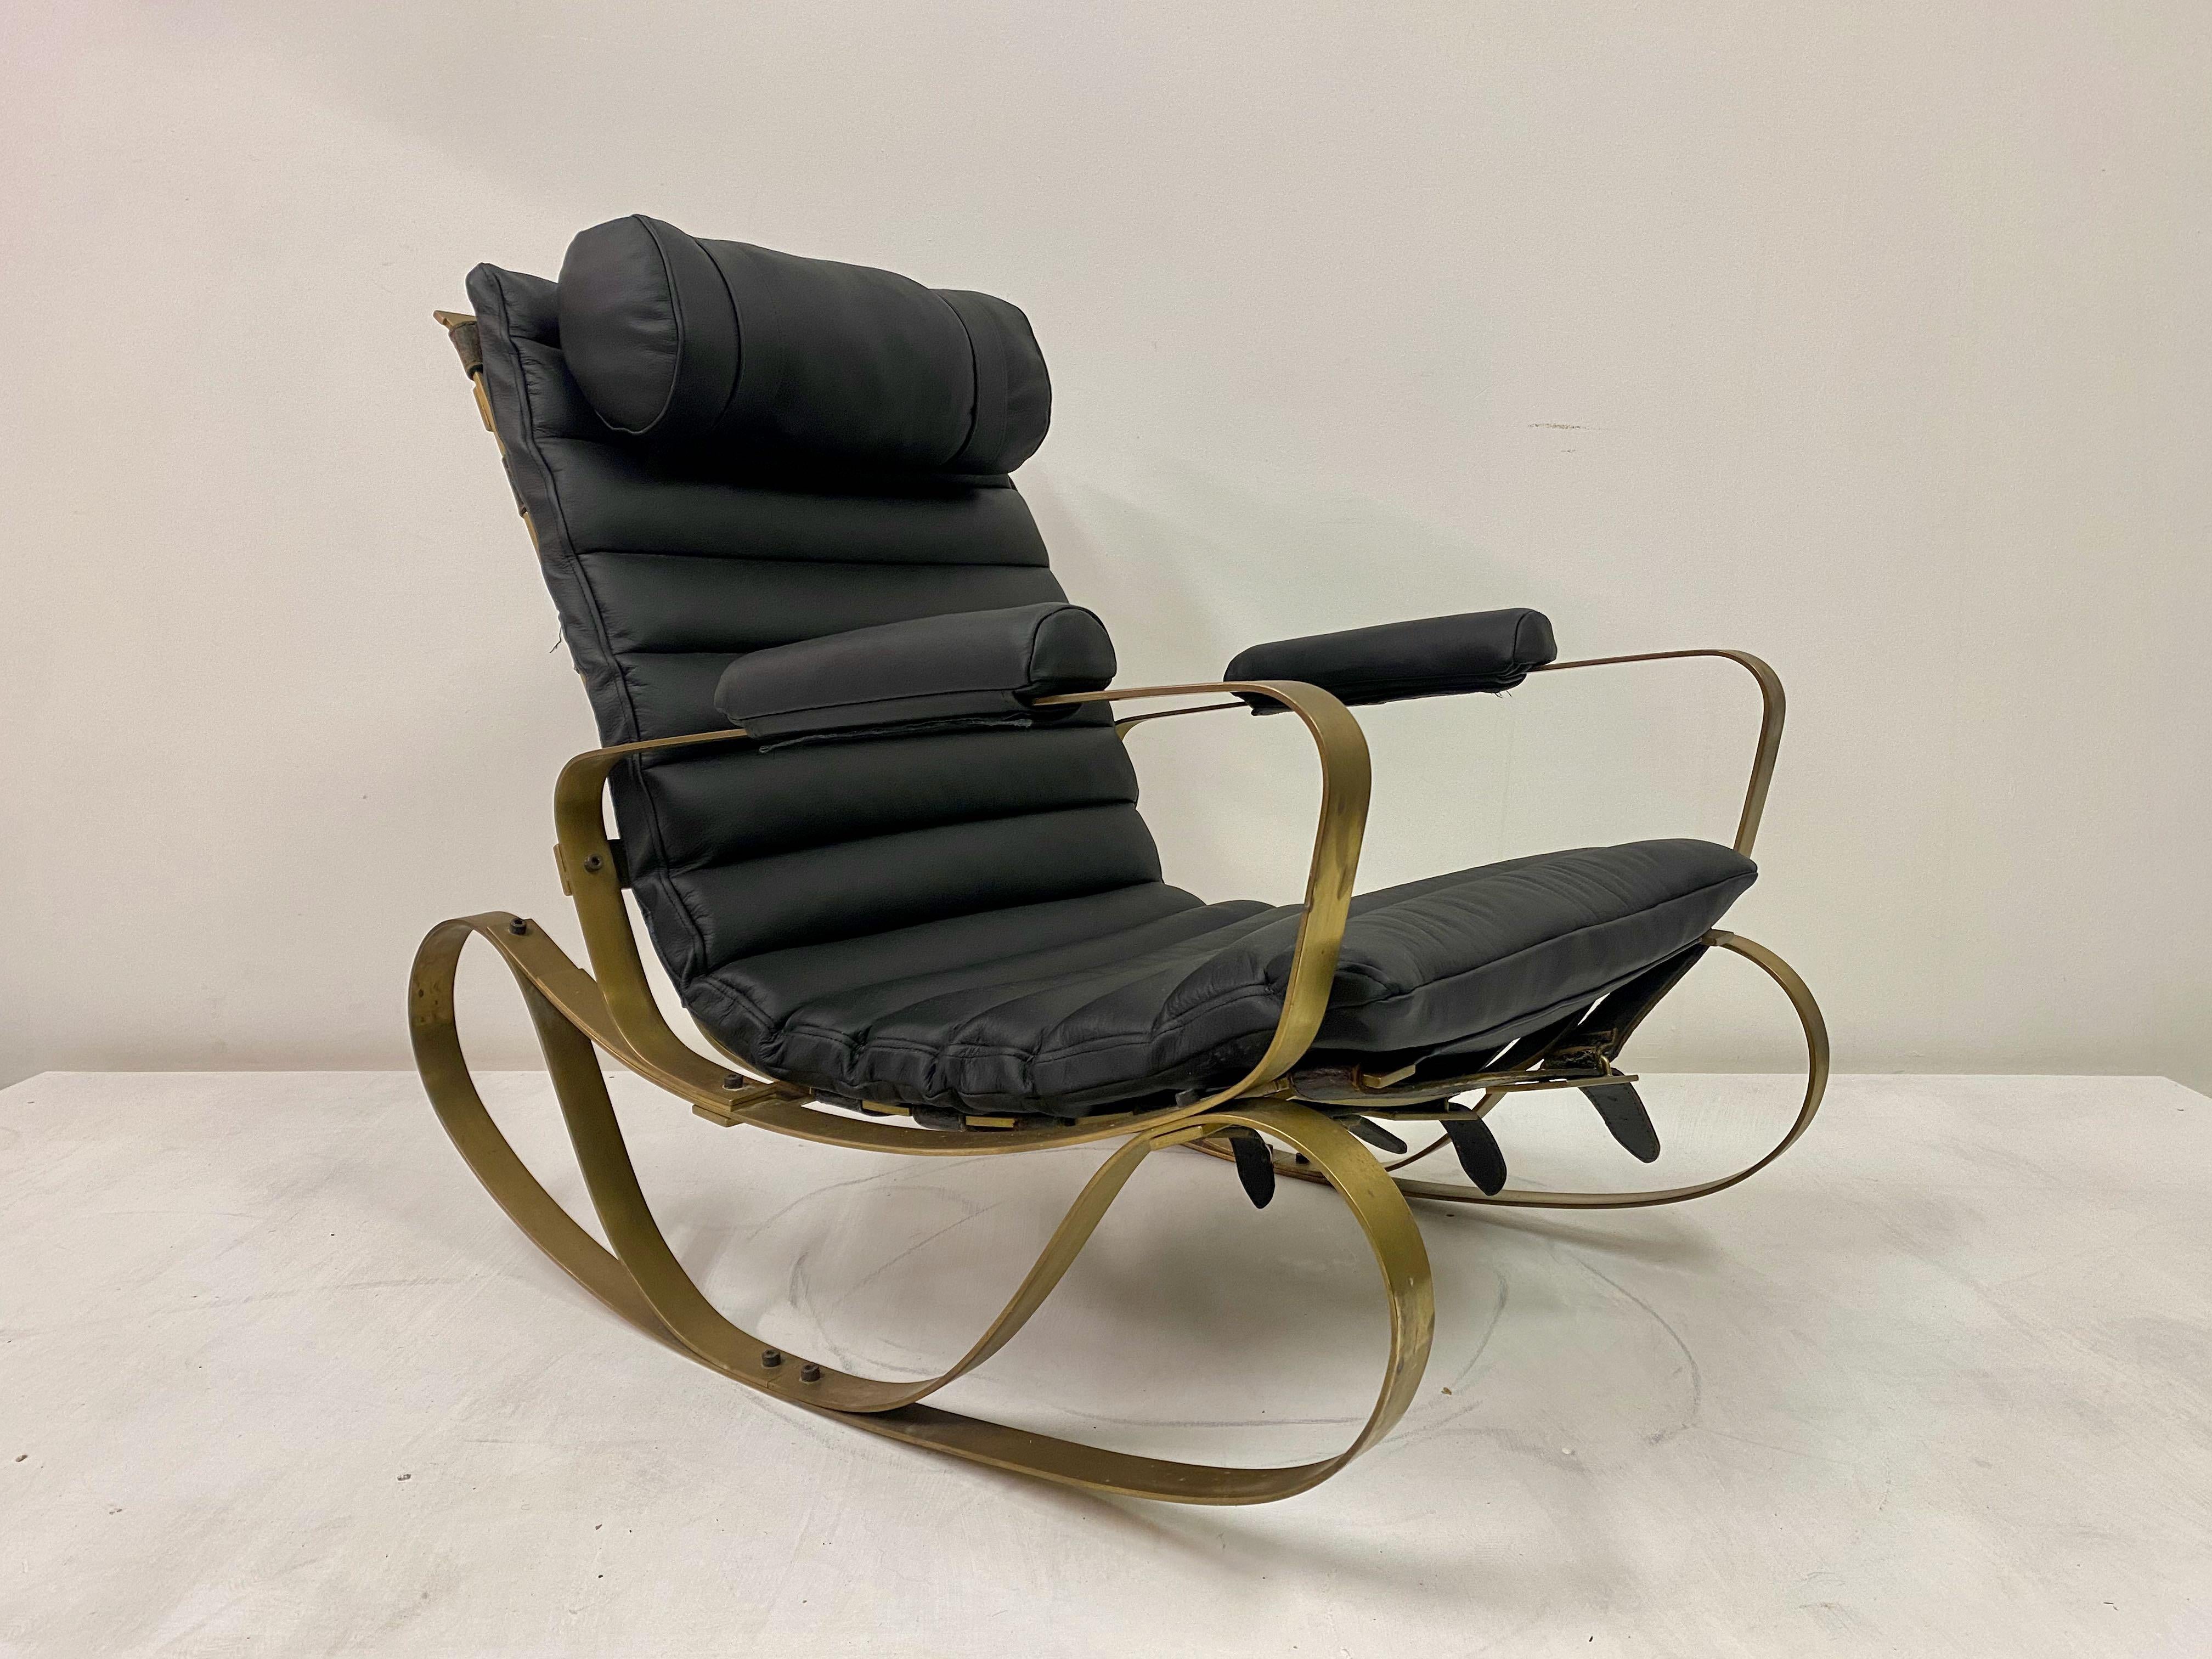 1970s Italian Brass and Black Leather Rocking Chair by Luciano Frigerio For Sale 8